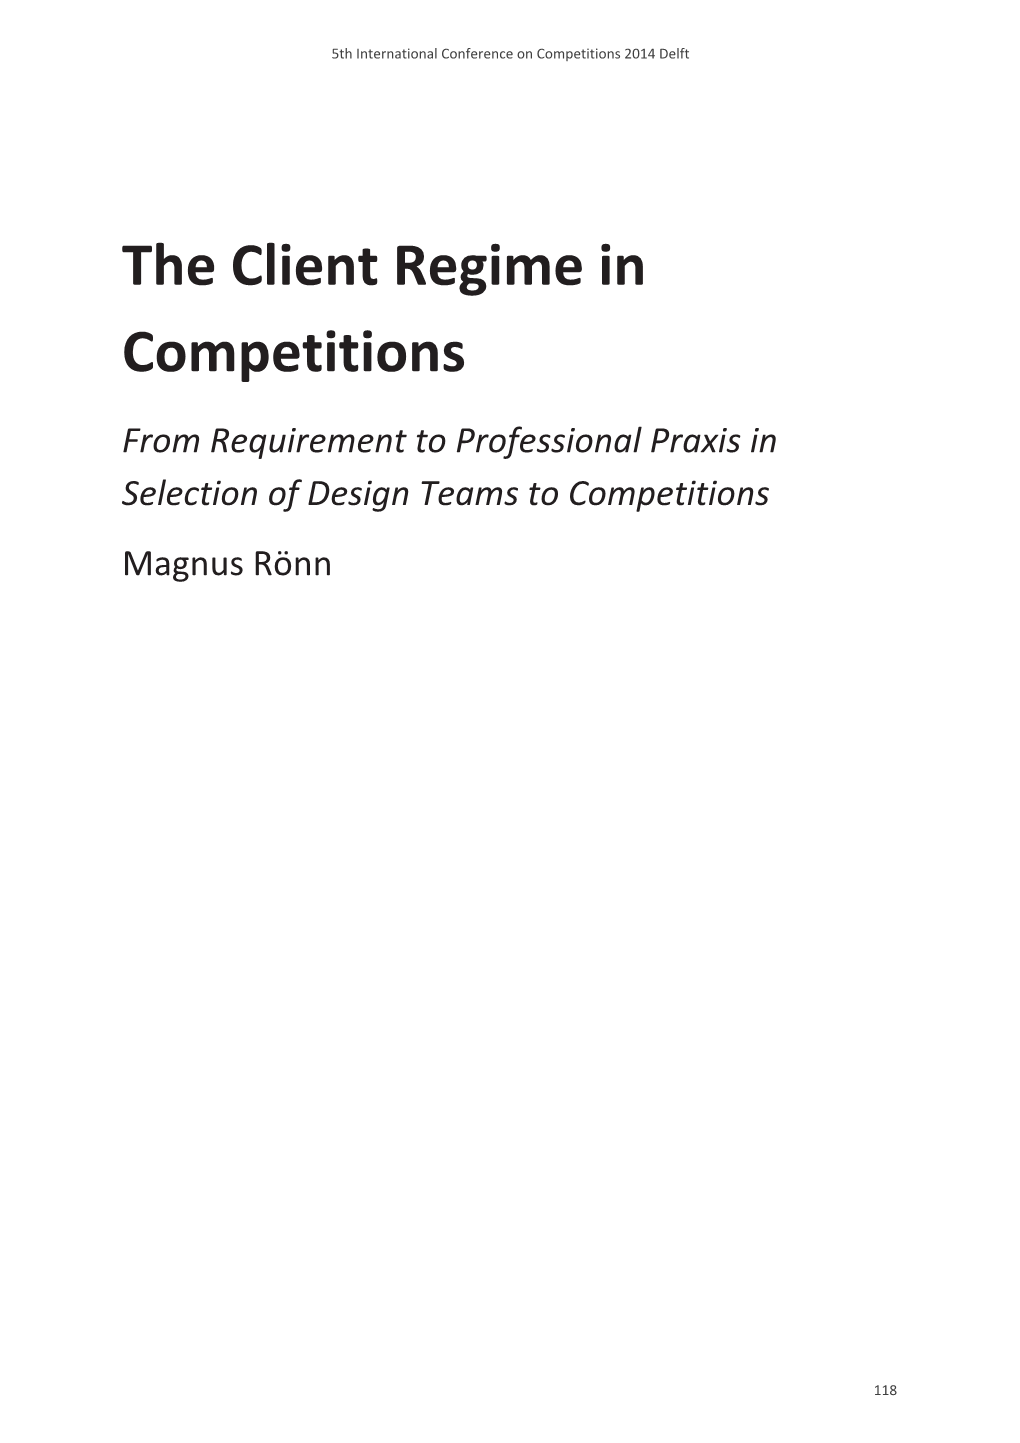 The Client Regime in Competitions